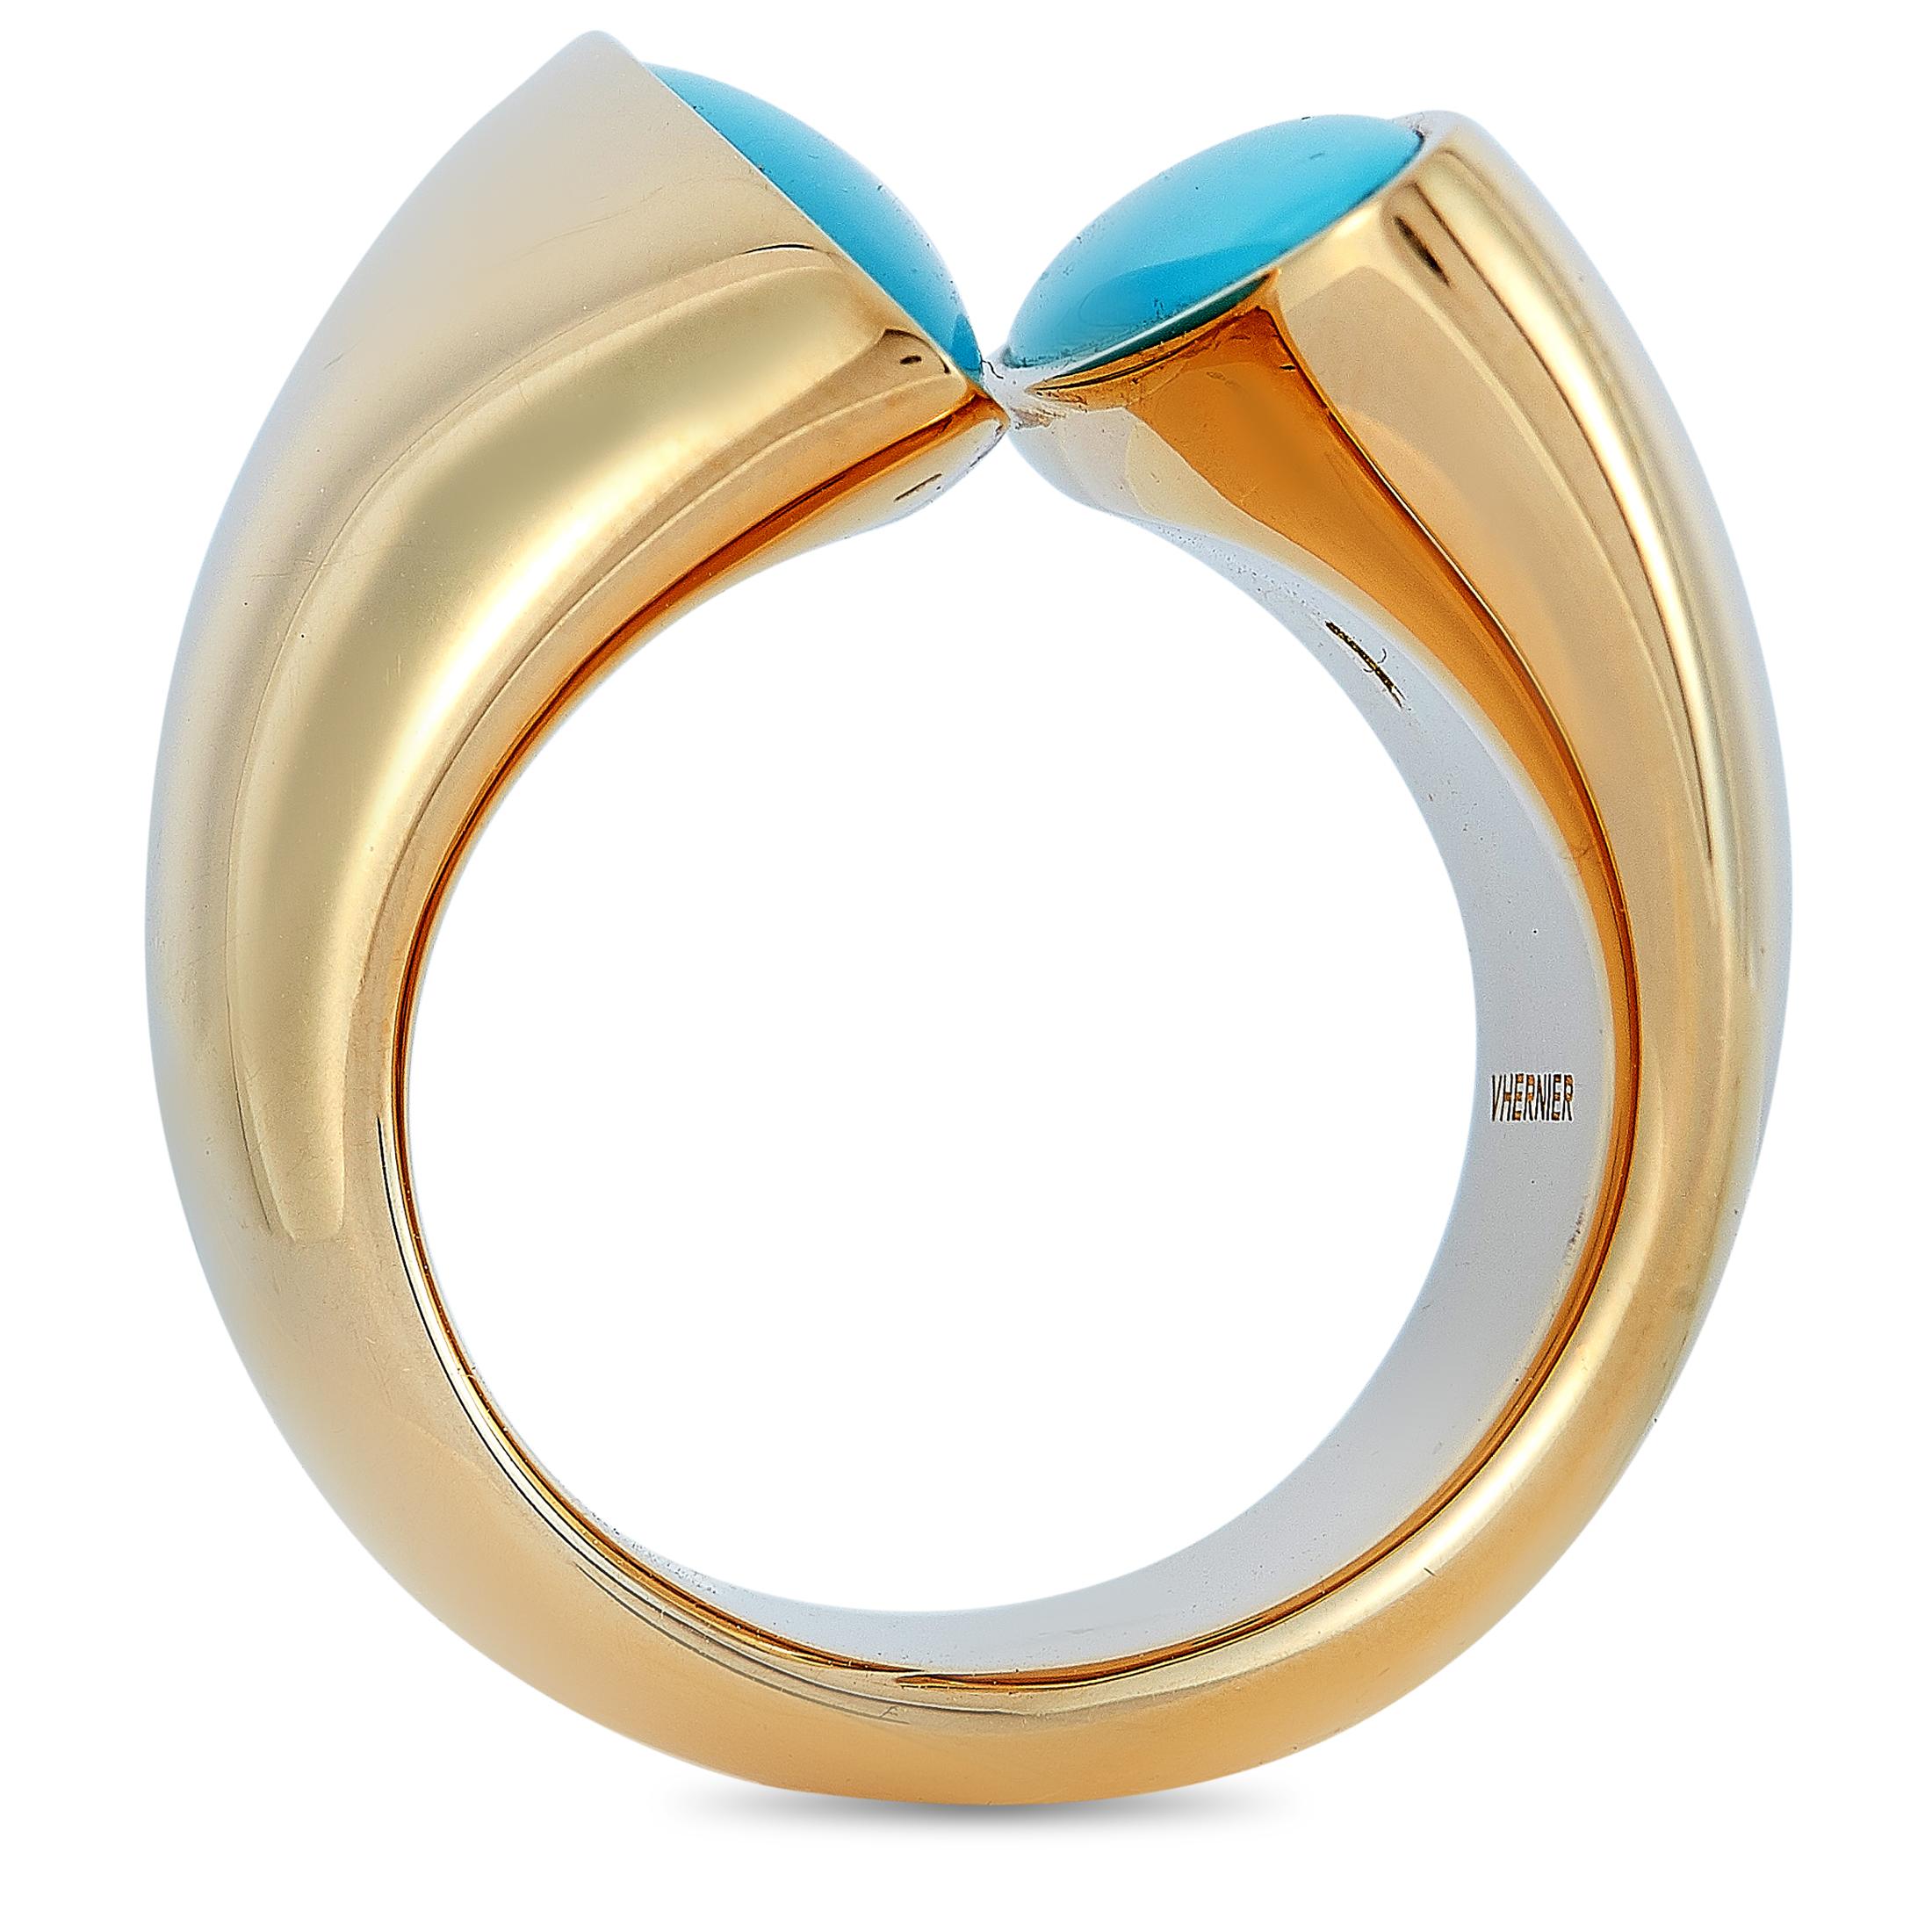 The Vhernier “Eclisse Medio” ring is made of 18K rose gold and embellished with turquoise and rock crystal. The ring weighs 20.4 grams and boasts band thickness of 10 mm and top height of 10 mm, while top dimensions measure 10 by 20 mm.
Ring Size: